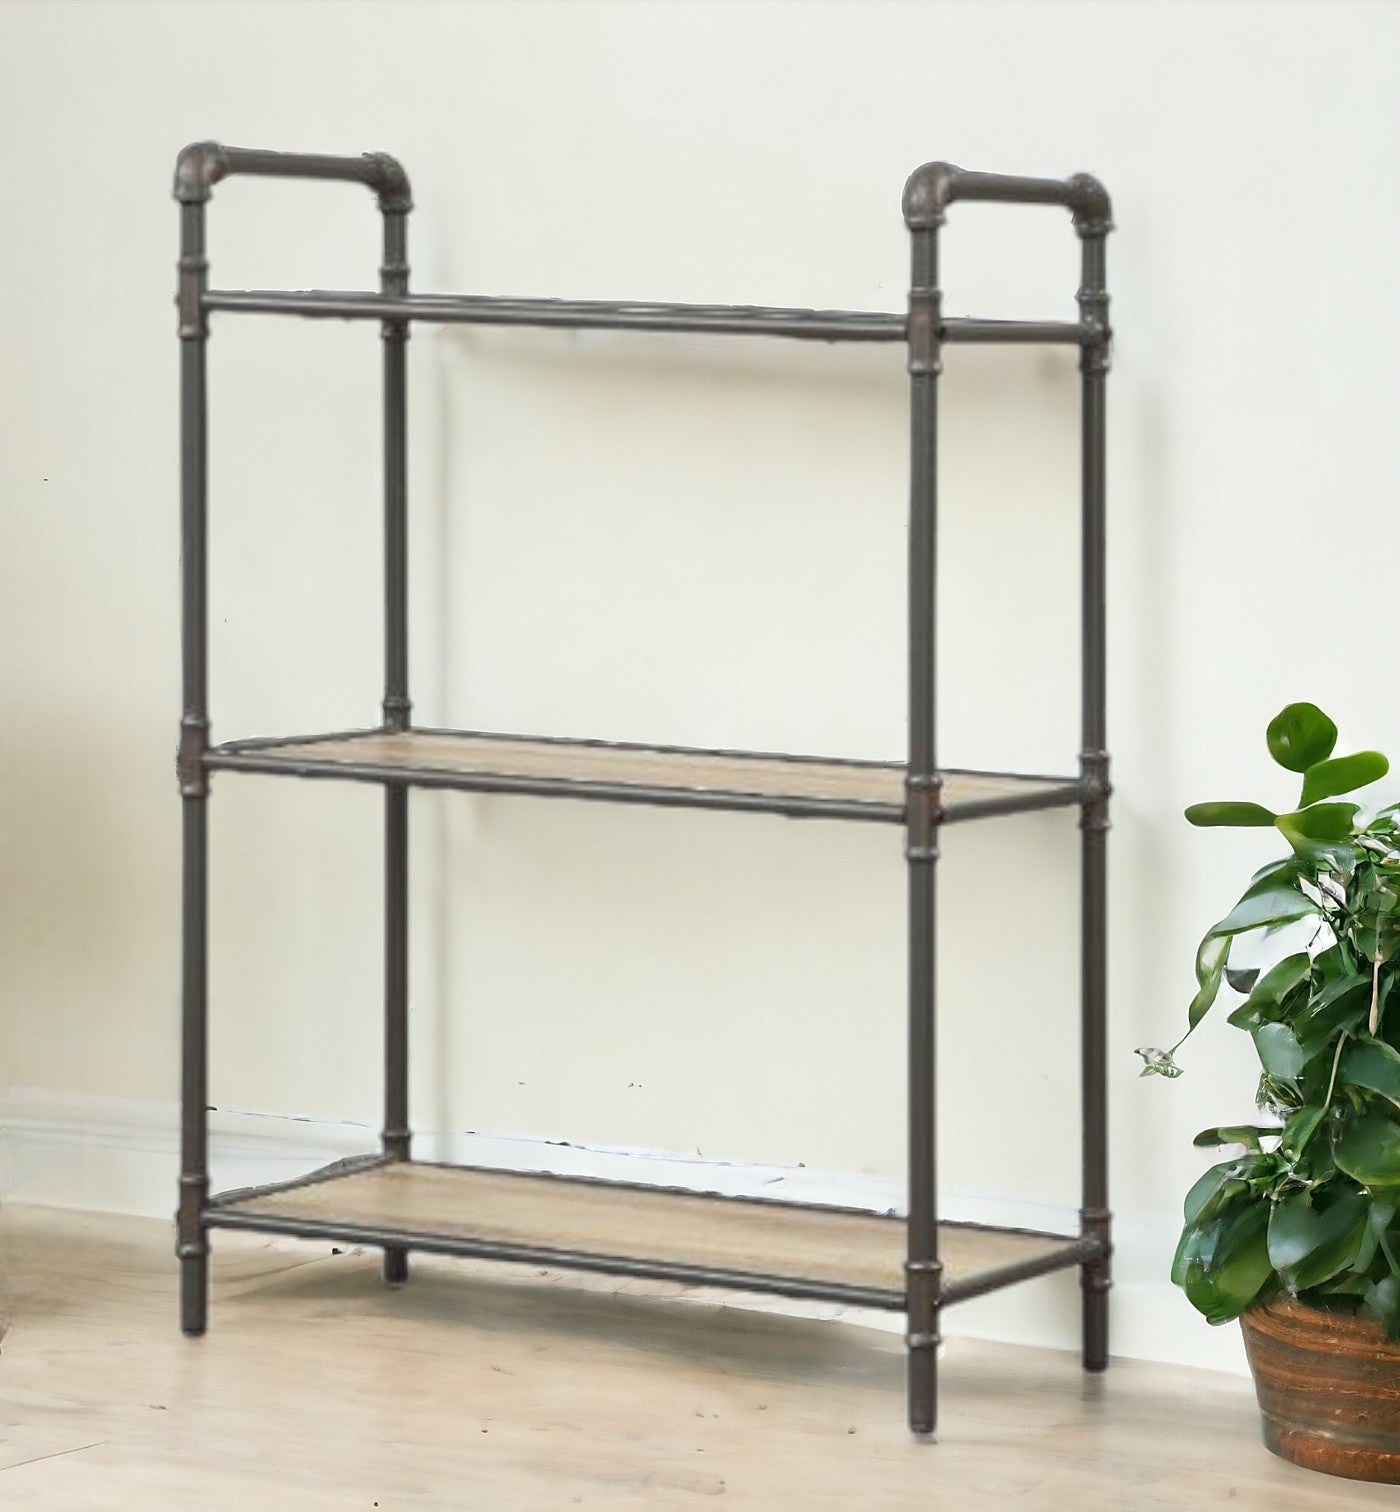 36" Antique Oak and Sandy Gray Metal Three Tier Standard Bookcase